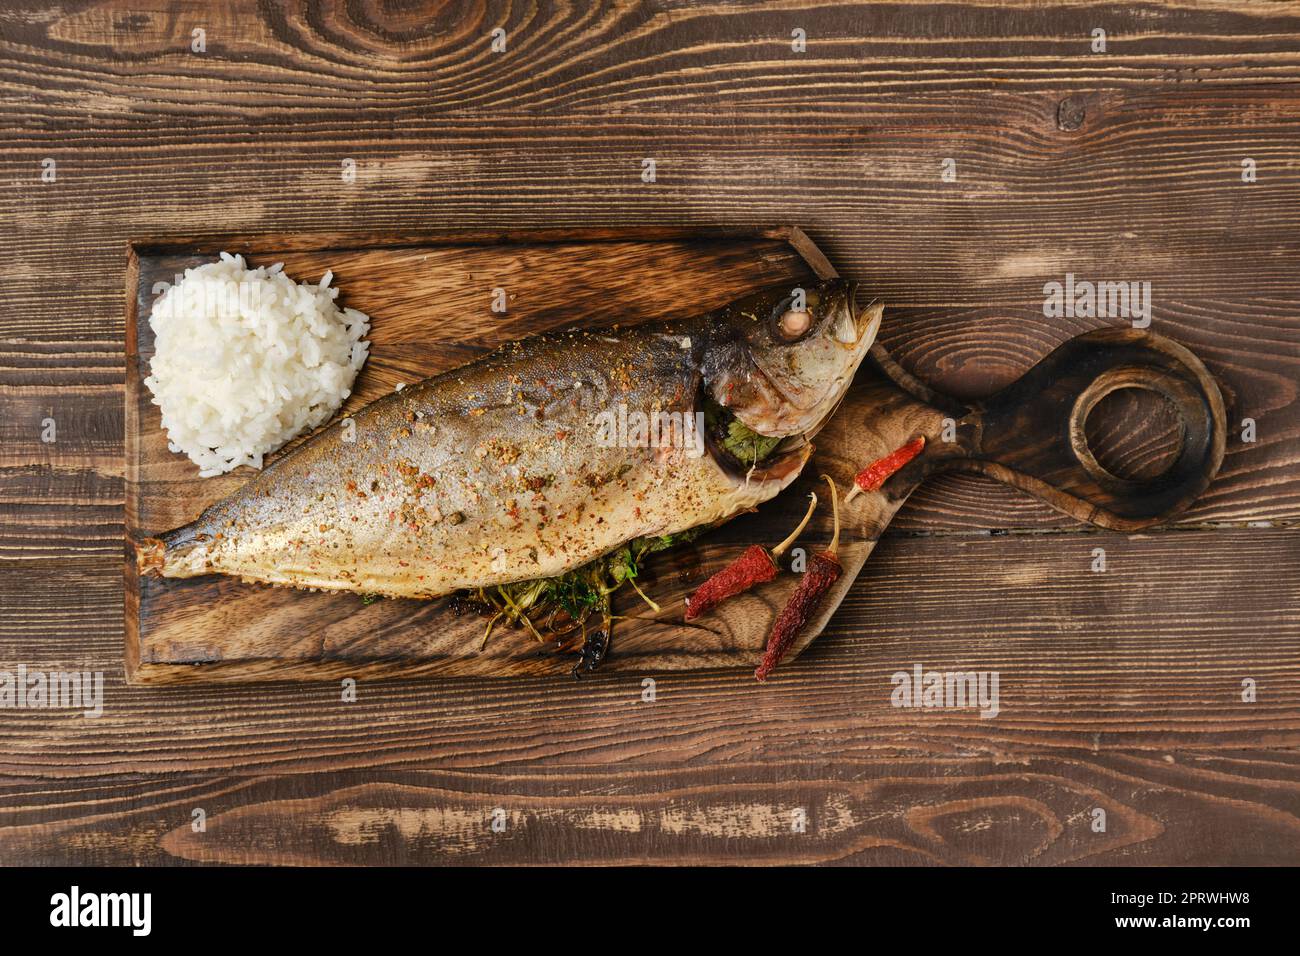 Yellow tailed mackerel with rice baked in oven Stock Photo